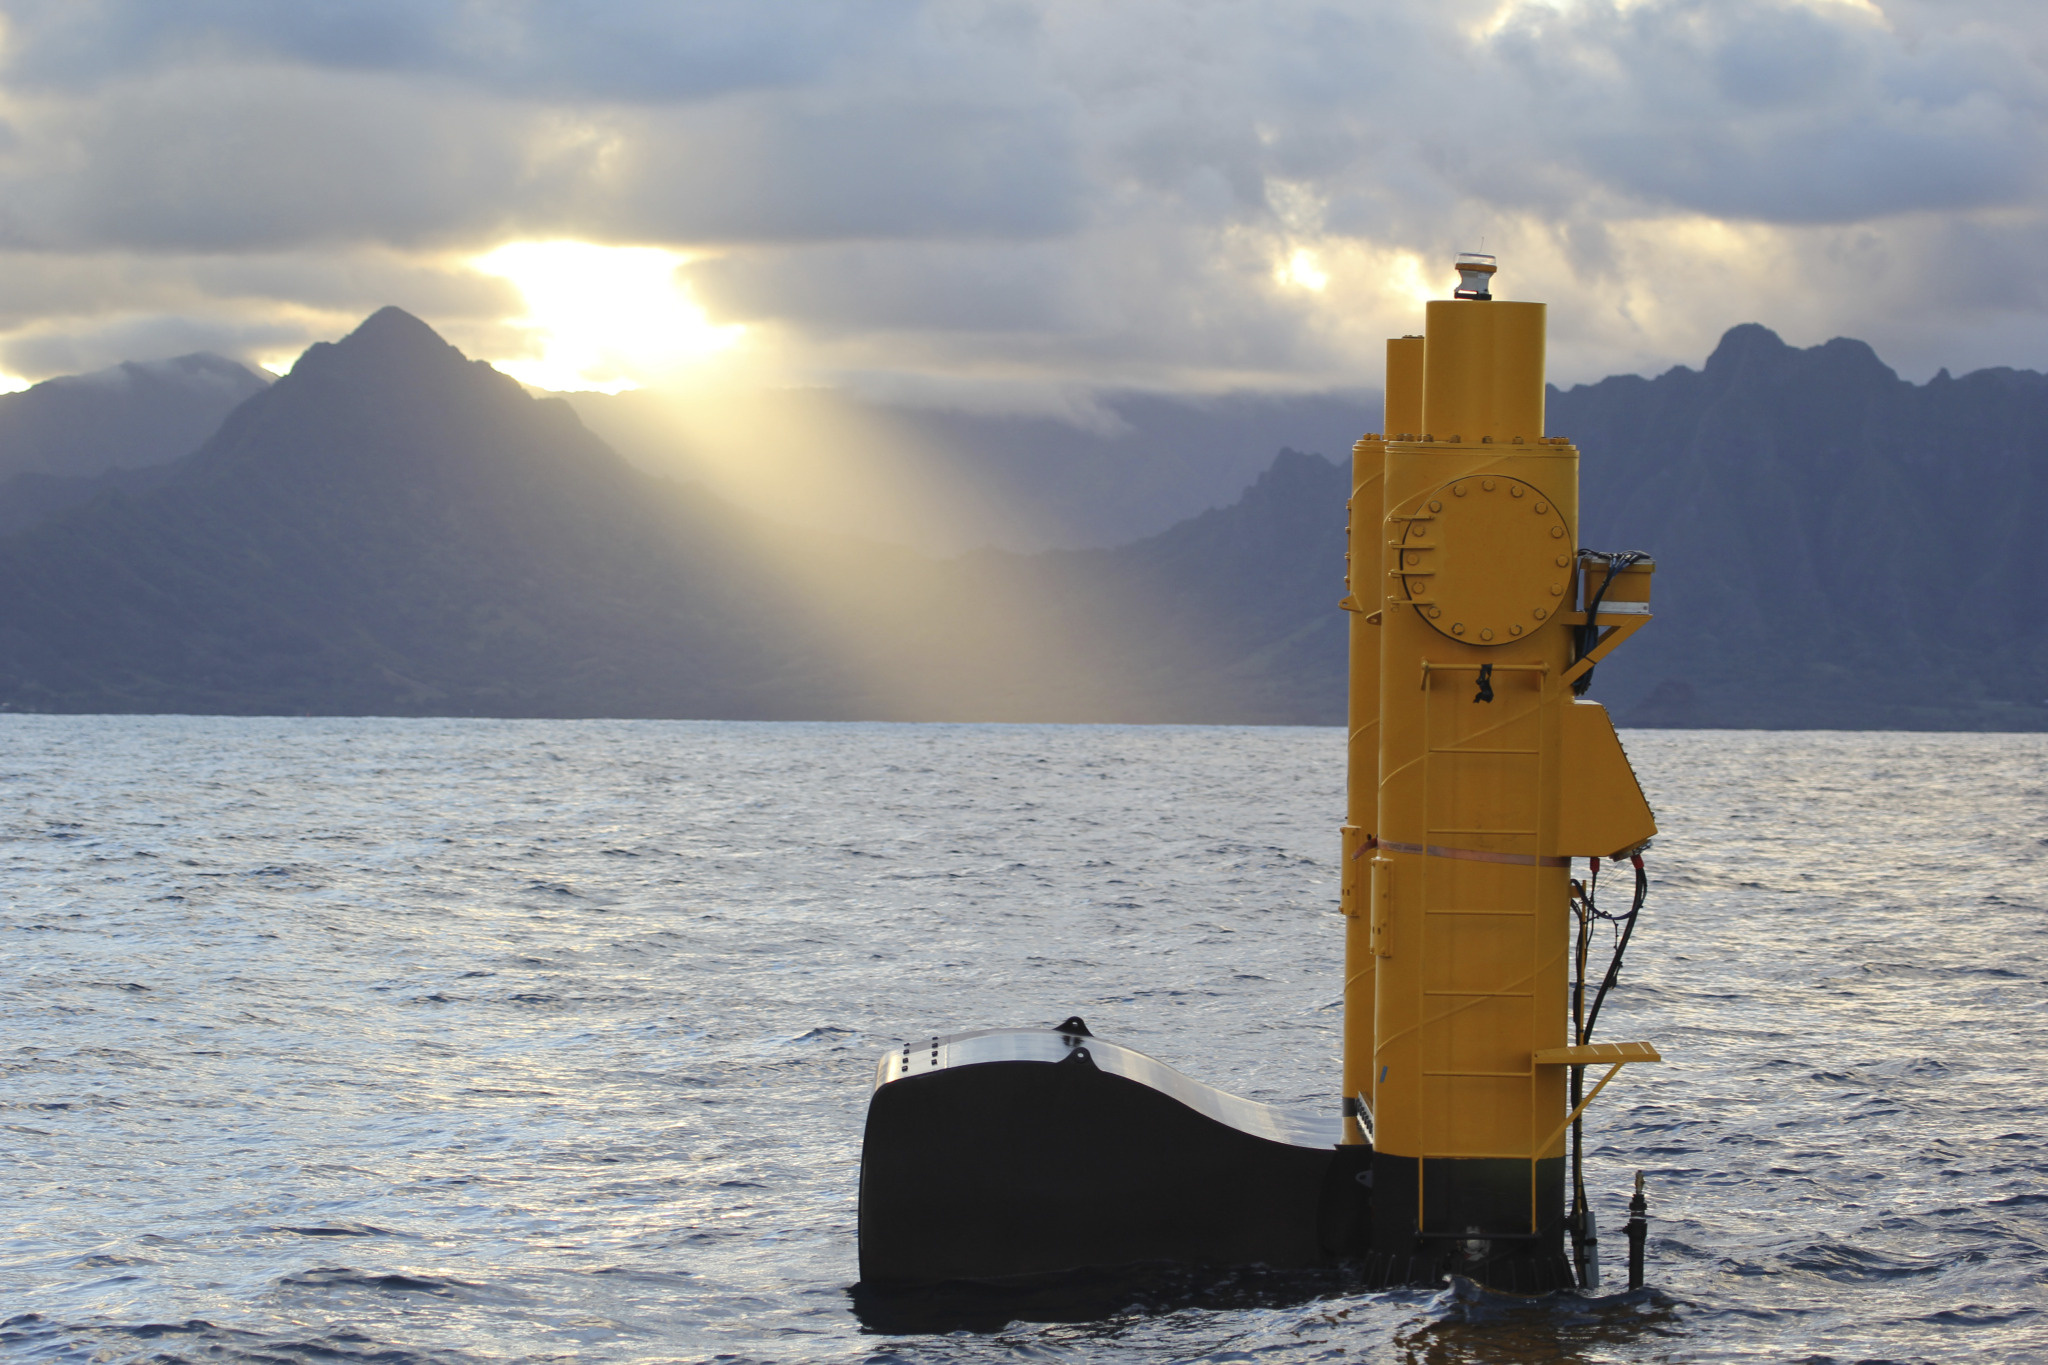 Northwest Energy Innovations Launches Wave Energy Device In Hawaii